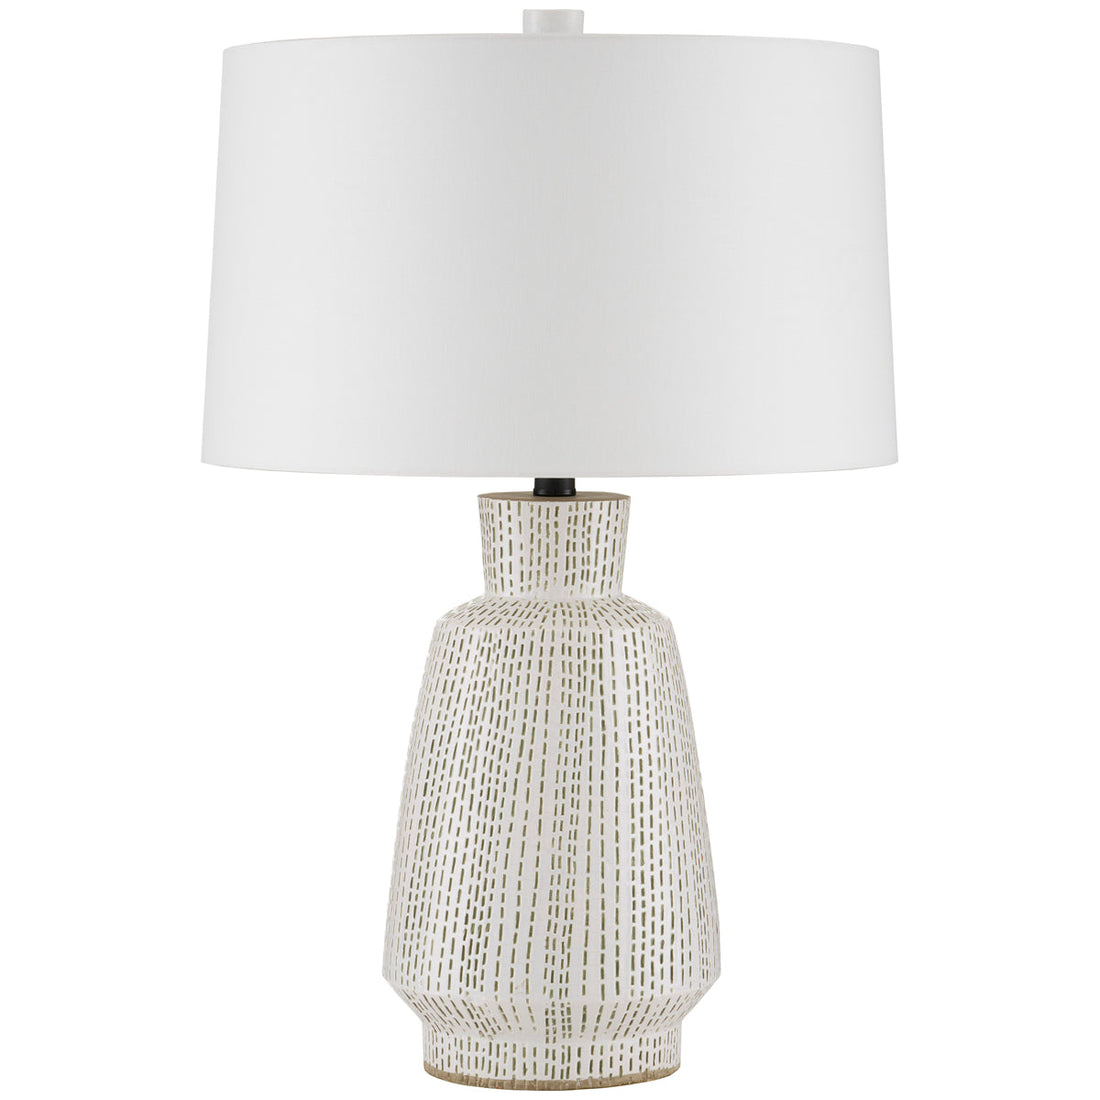 Currey and Company Dash White Table Lamp